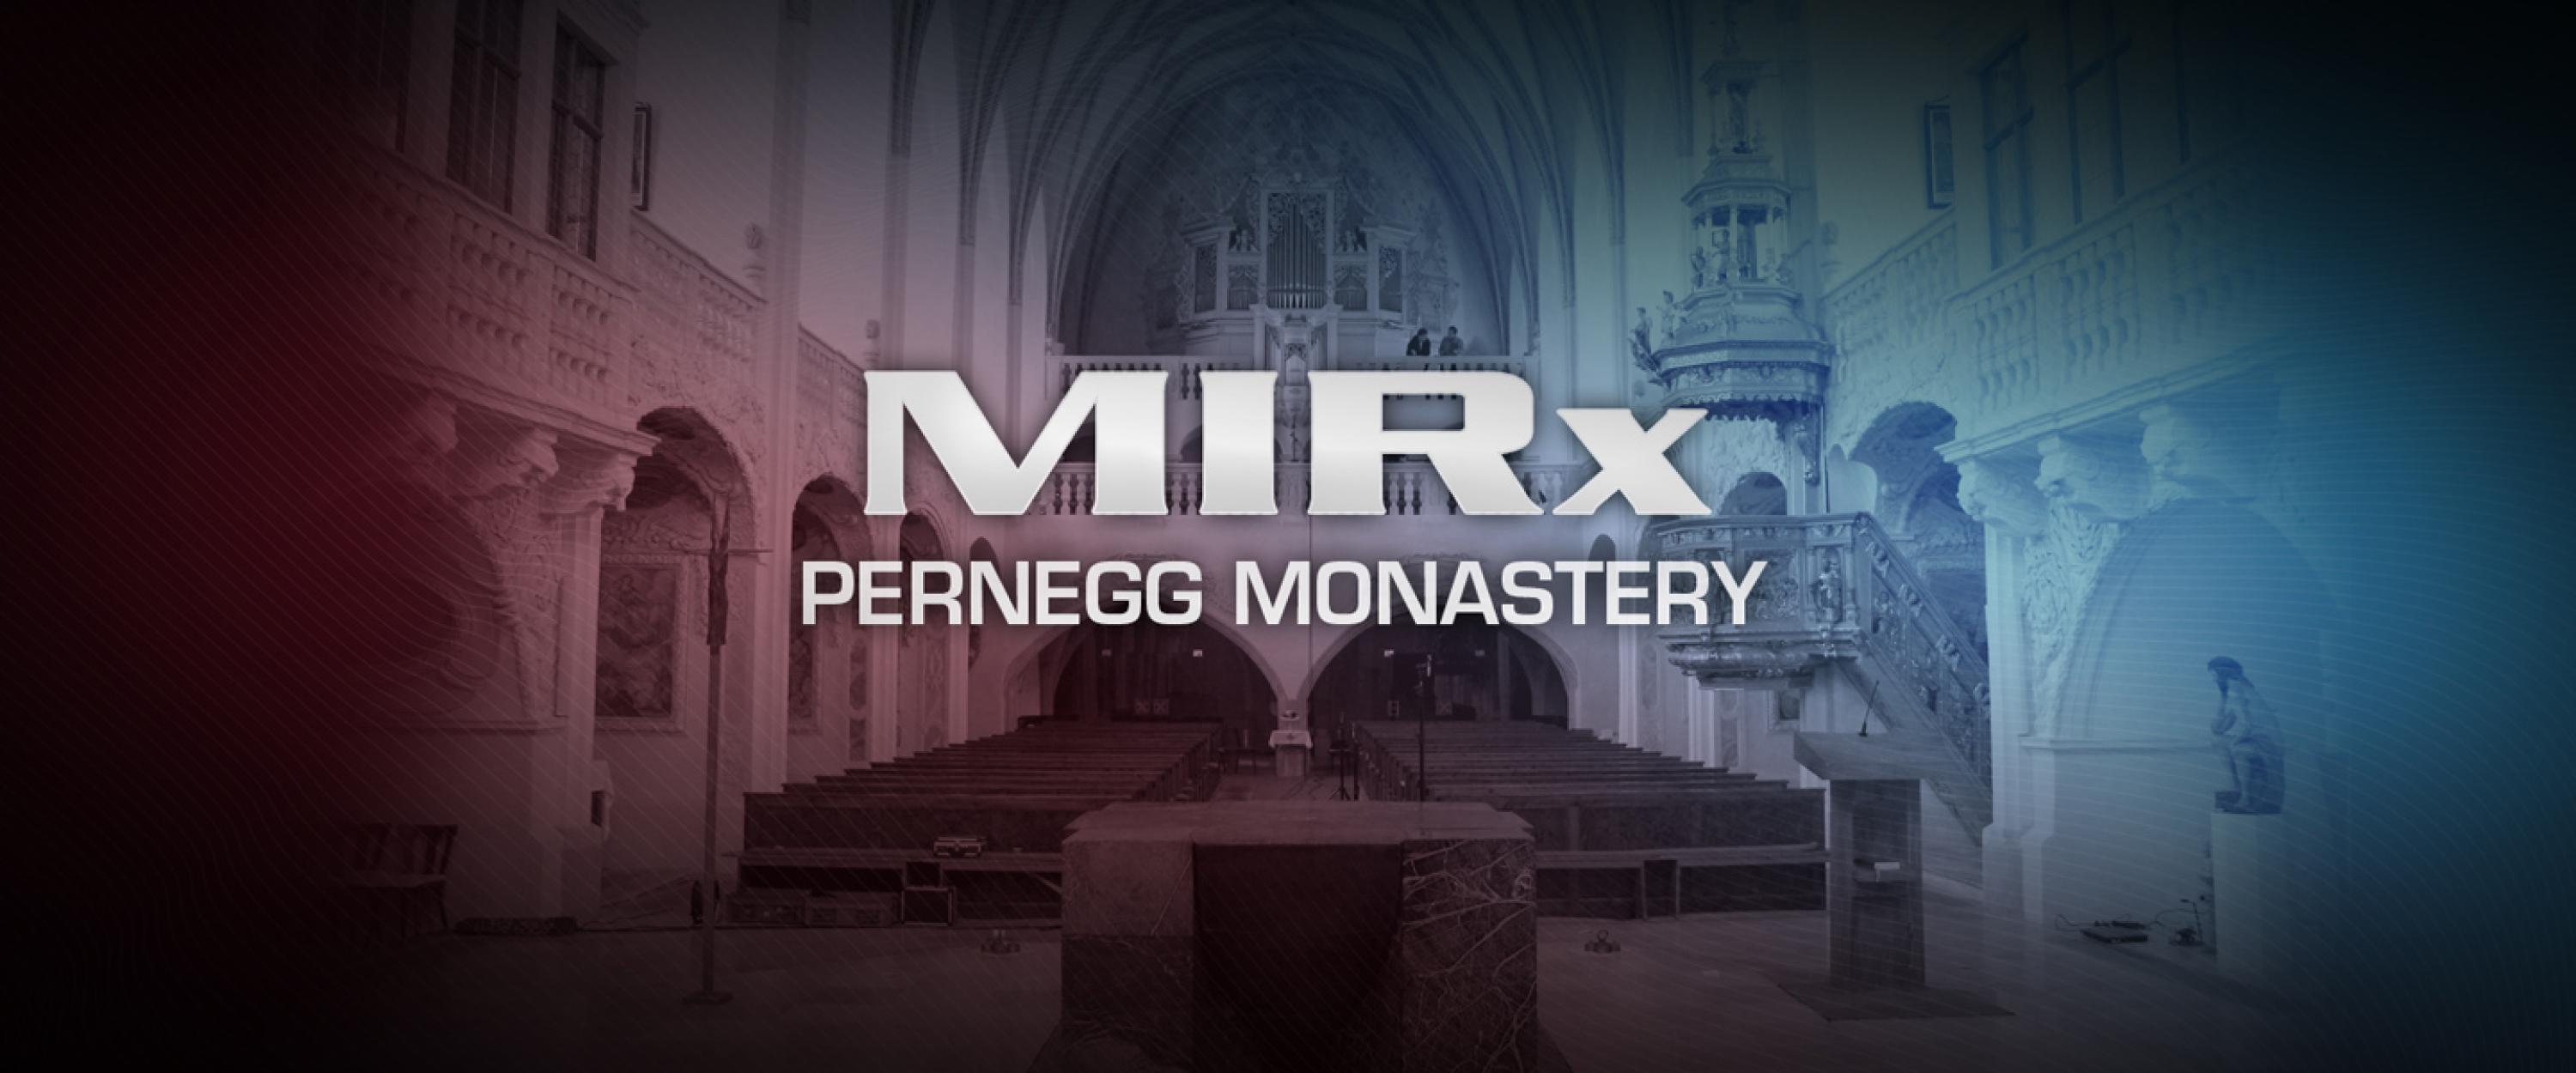 Vienna Symphonic Library MIRx Pernegg Monastery | Sweetwater